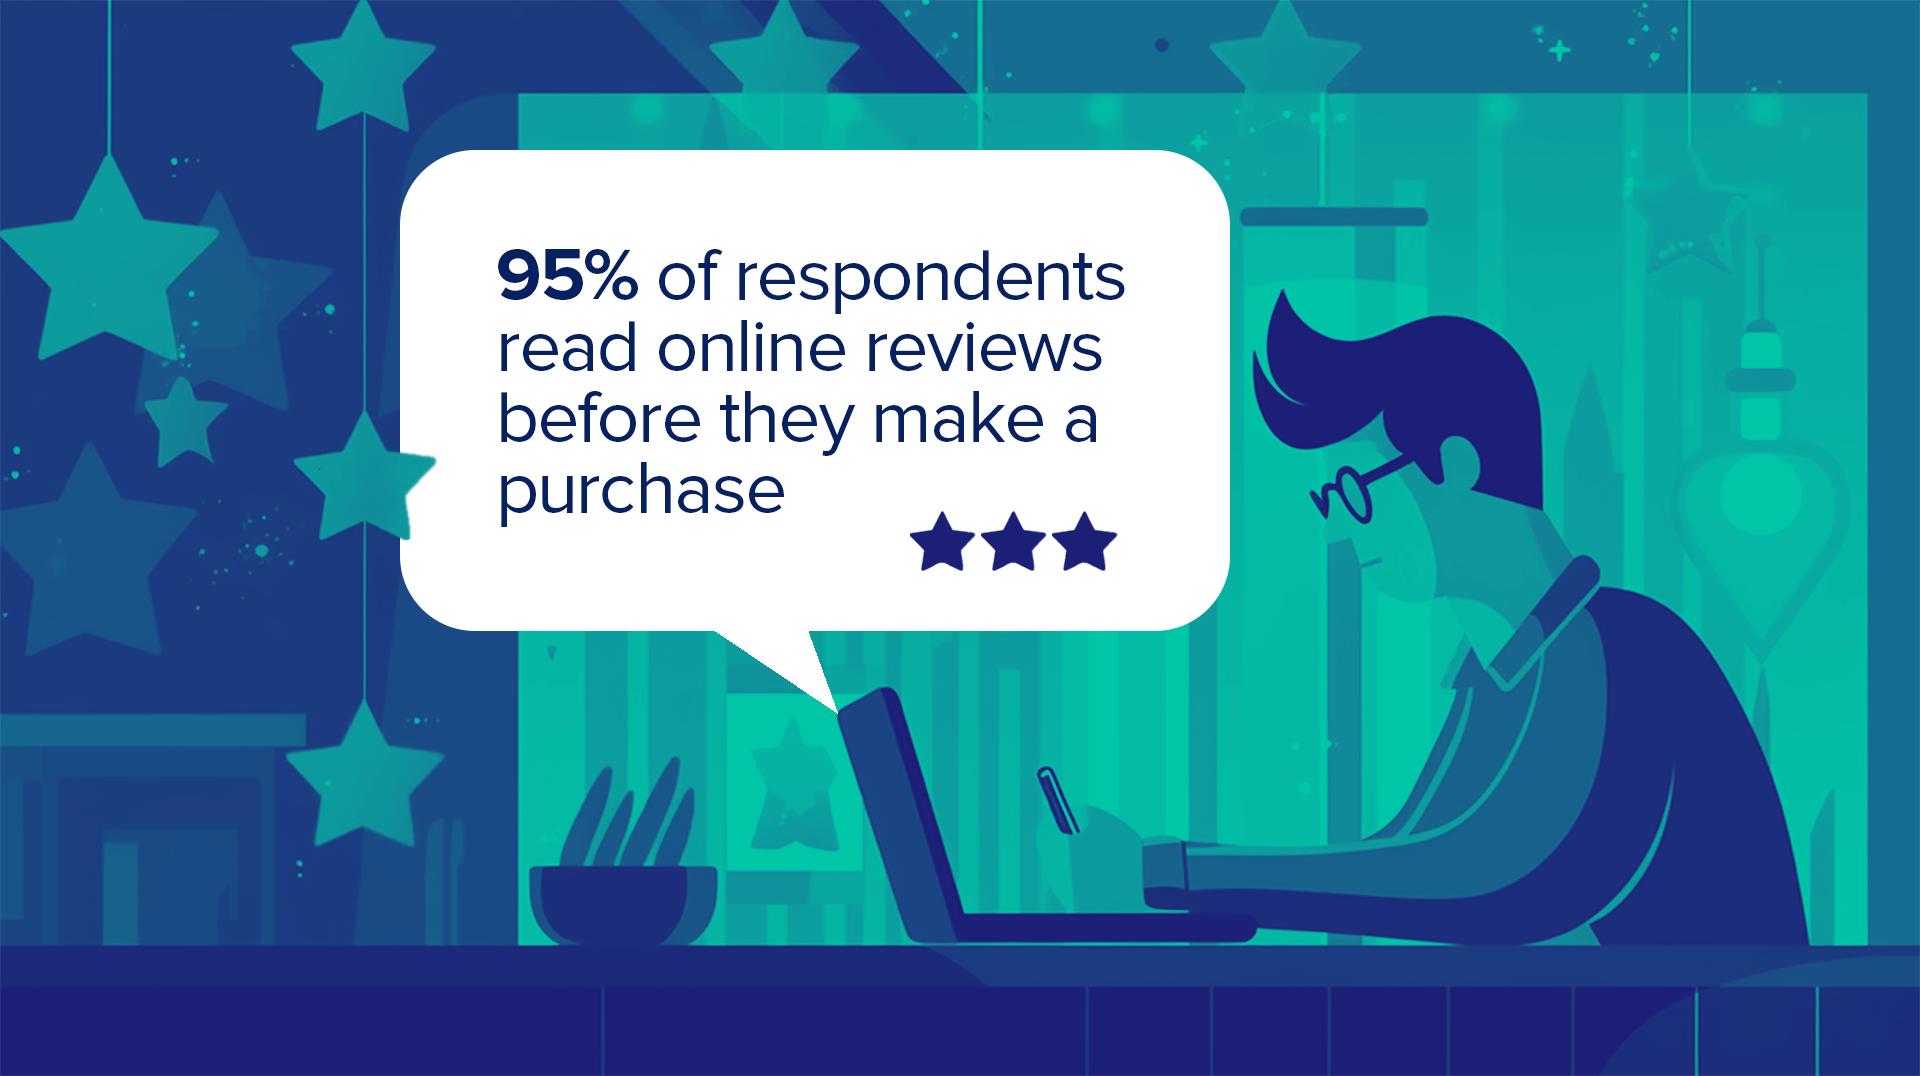 Infographic about a how to ask for a review statistic that says 95% of respondents read online reviews before they make a purchase.